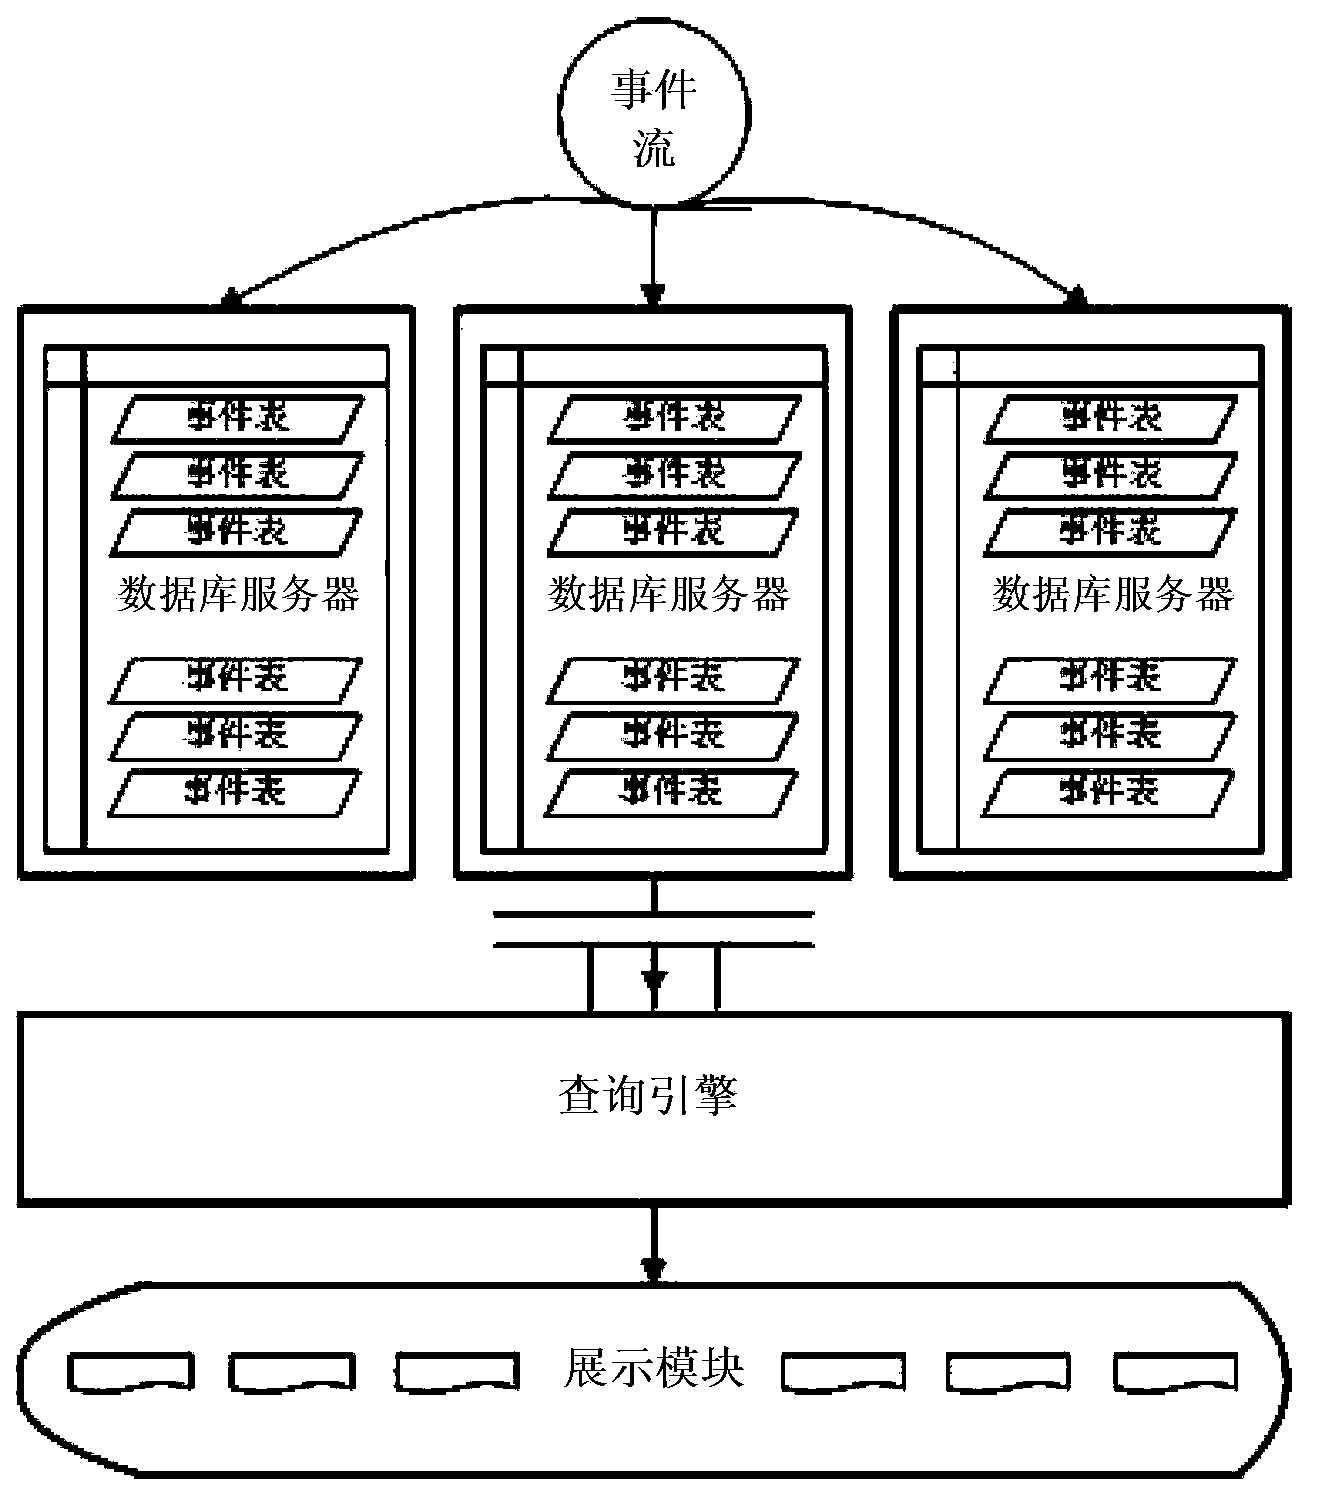 Mass event processing method and device